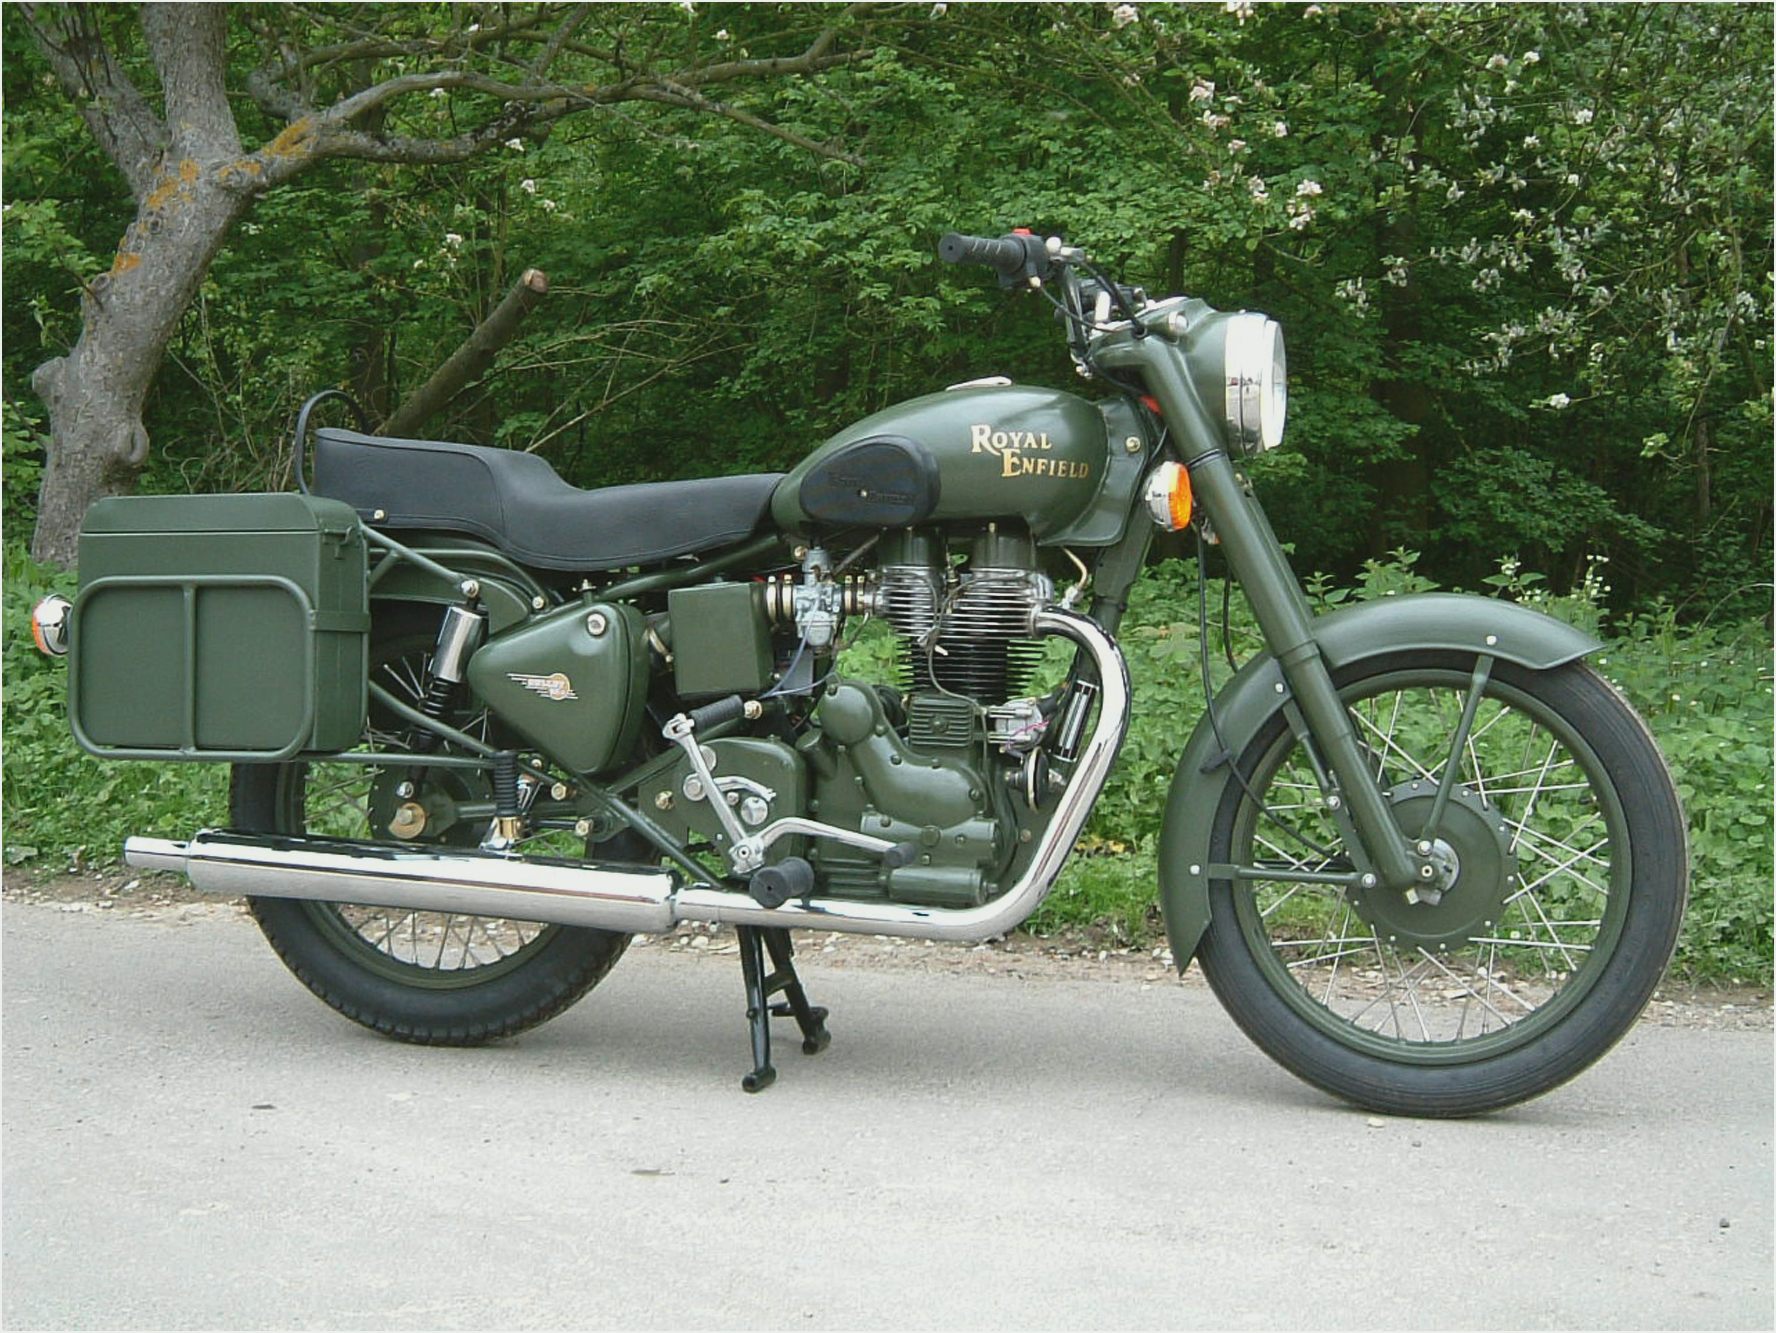 Royal Enfield Bullet 350 Army 1998 Wallpapers - Indian Army Royal Enfield Bullet - HD Wallpaper 